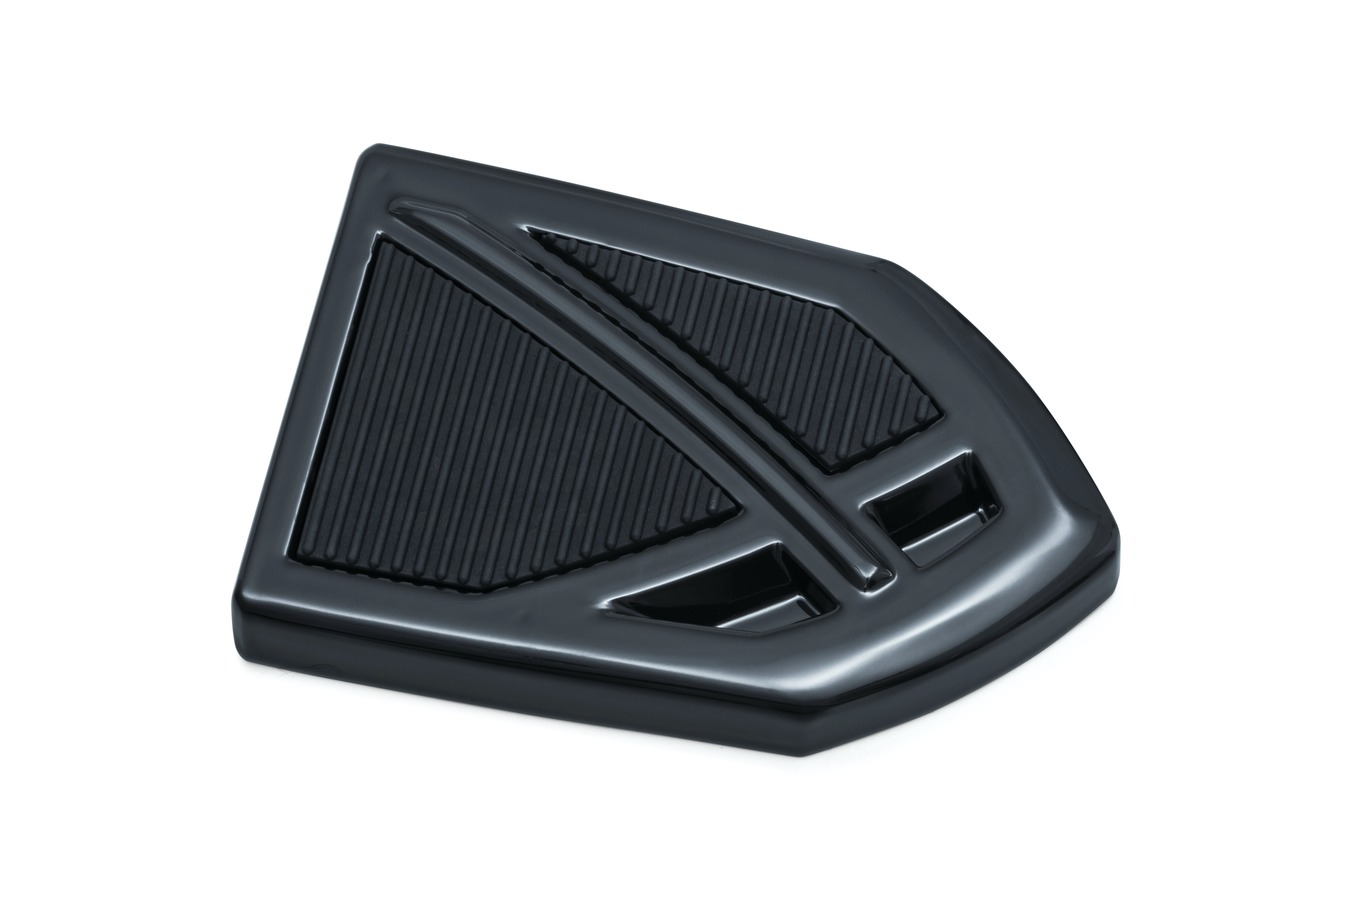 Complement the aggressive look of Kuryakyn Phantom Floorboards with this direct replacement for the stock brake pedal pad. The modern, aggressive design features sharp angular lines combined with quality aluminum and EPDM rubber pads for stability and traction when applying the rear brake